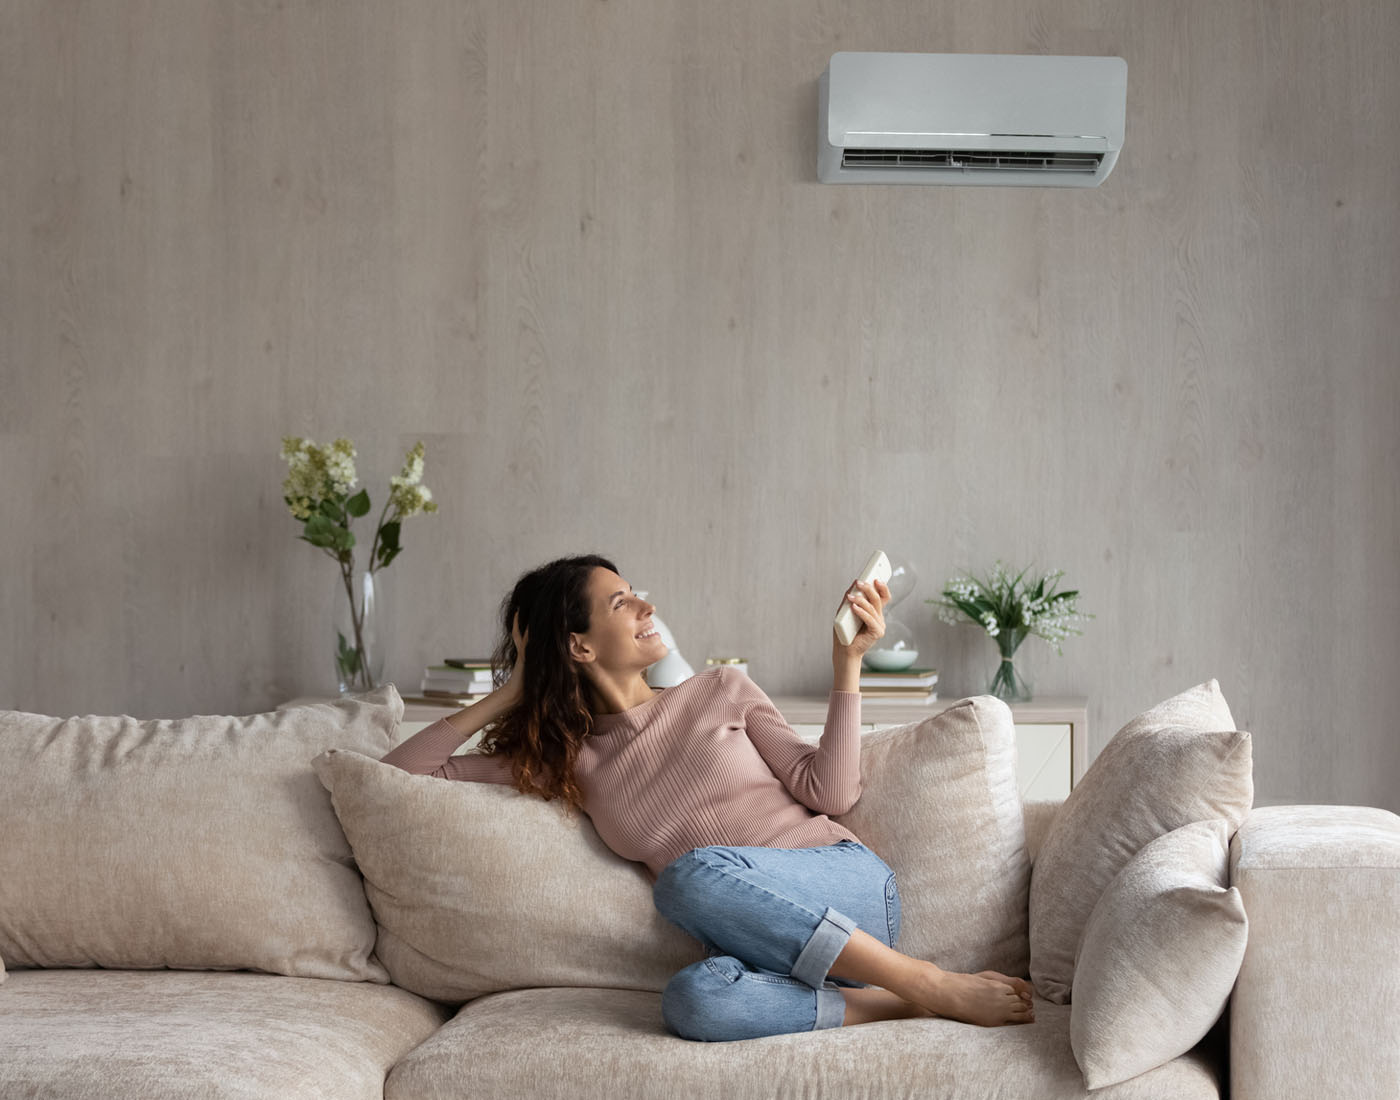 Sydney's air conditioning experts with 10 years of experience